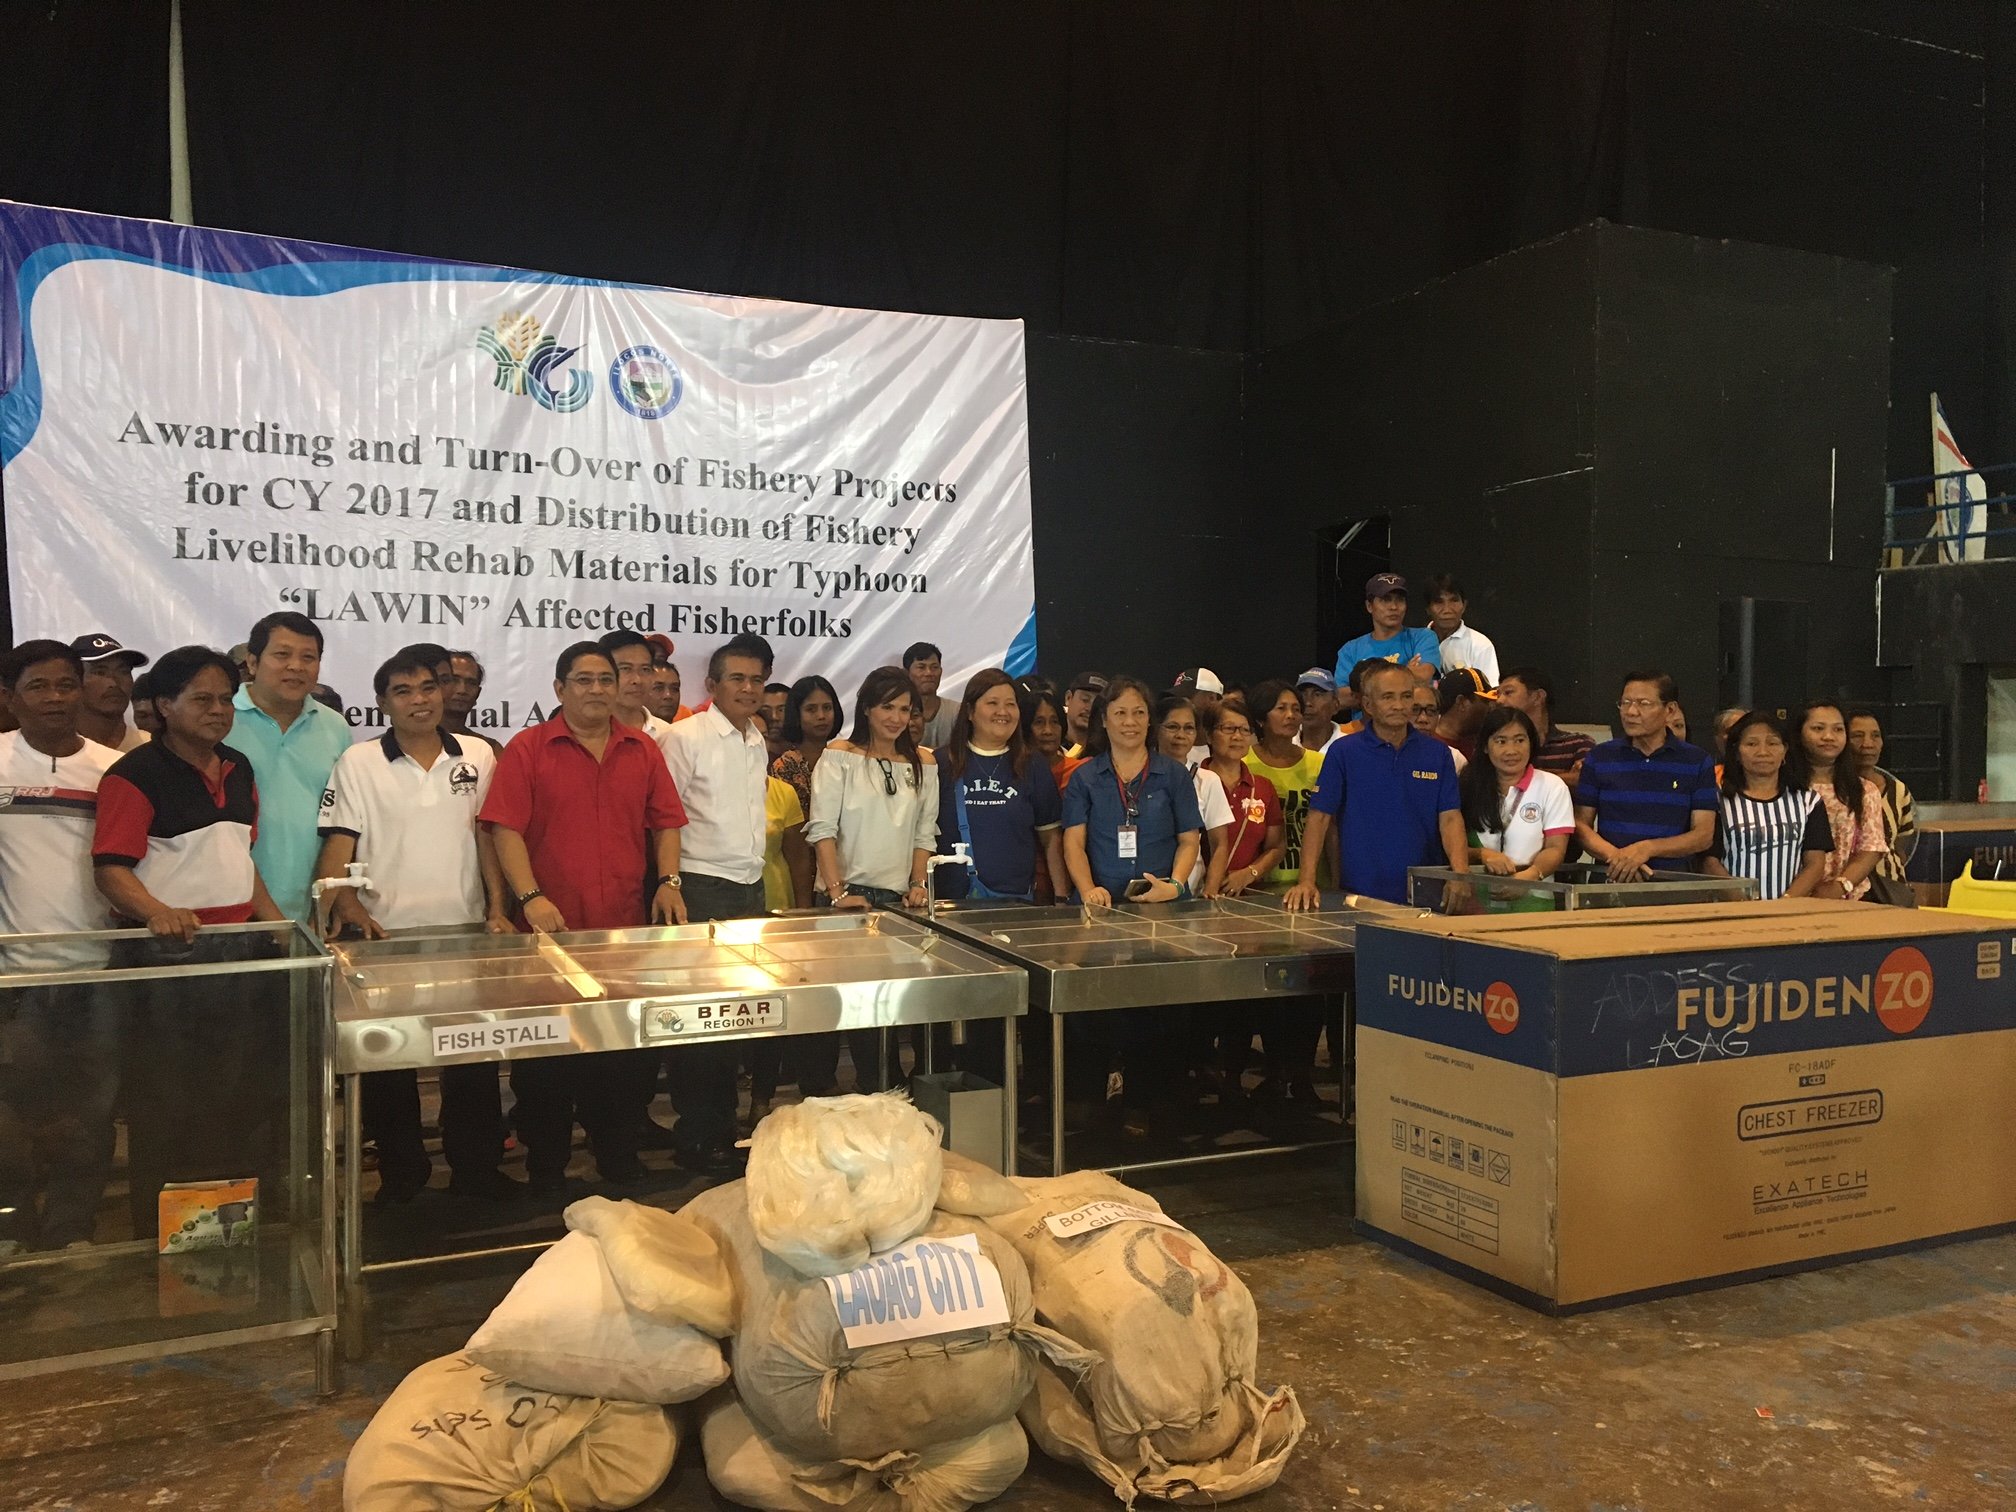 Distribution of various fishing materials to Ilocos Norte fishermen who were hard hit by typhoon Lawin